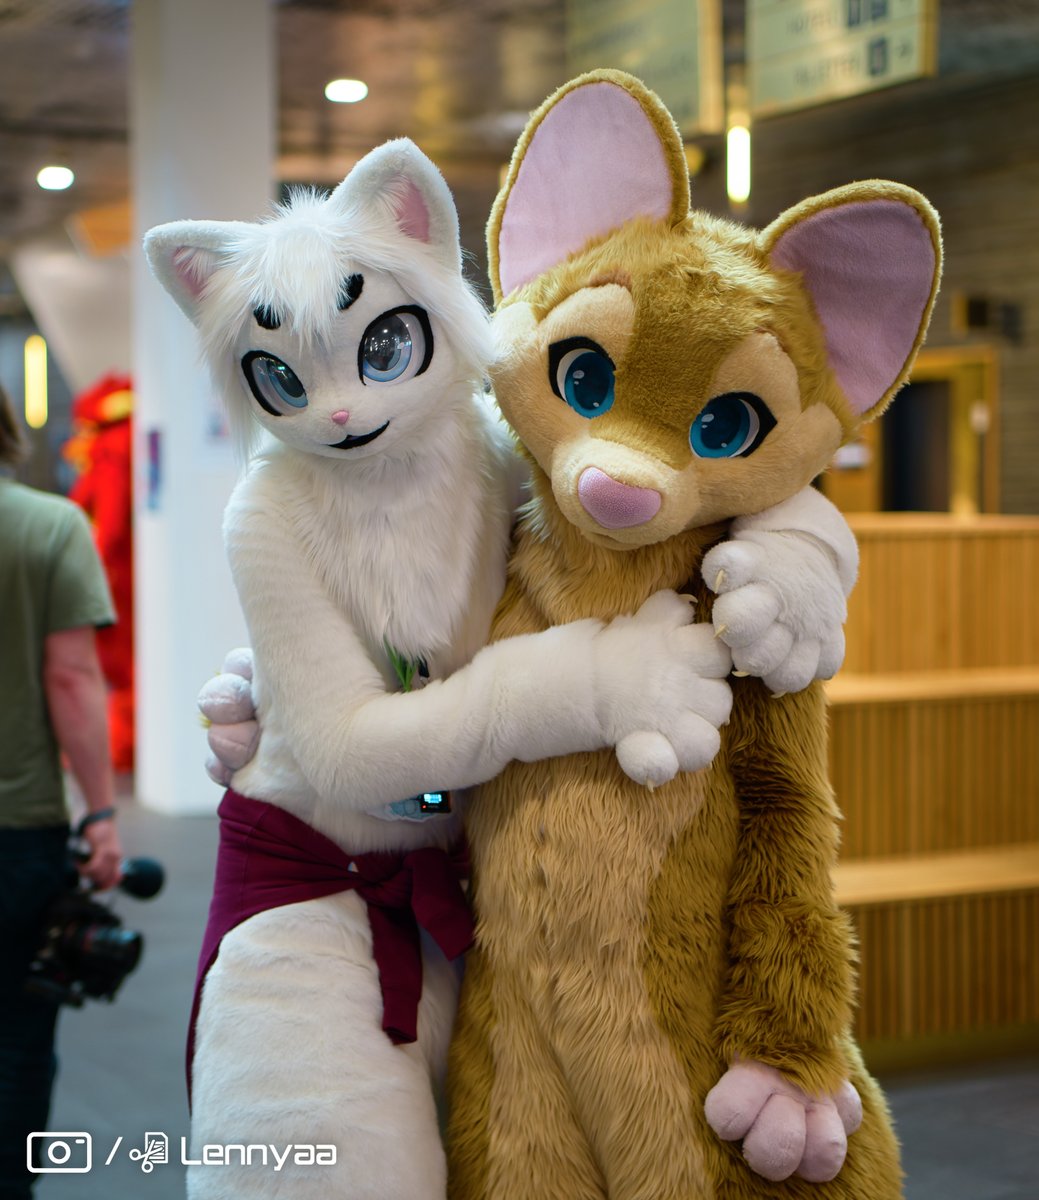 😸Or maybe feast with the mouse instead!

🐱@LennyaaFluff
🐭@NFC_iris

#kemonofursuit #FursuitFriday #nfc2023